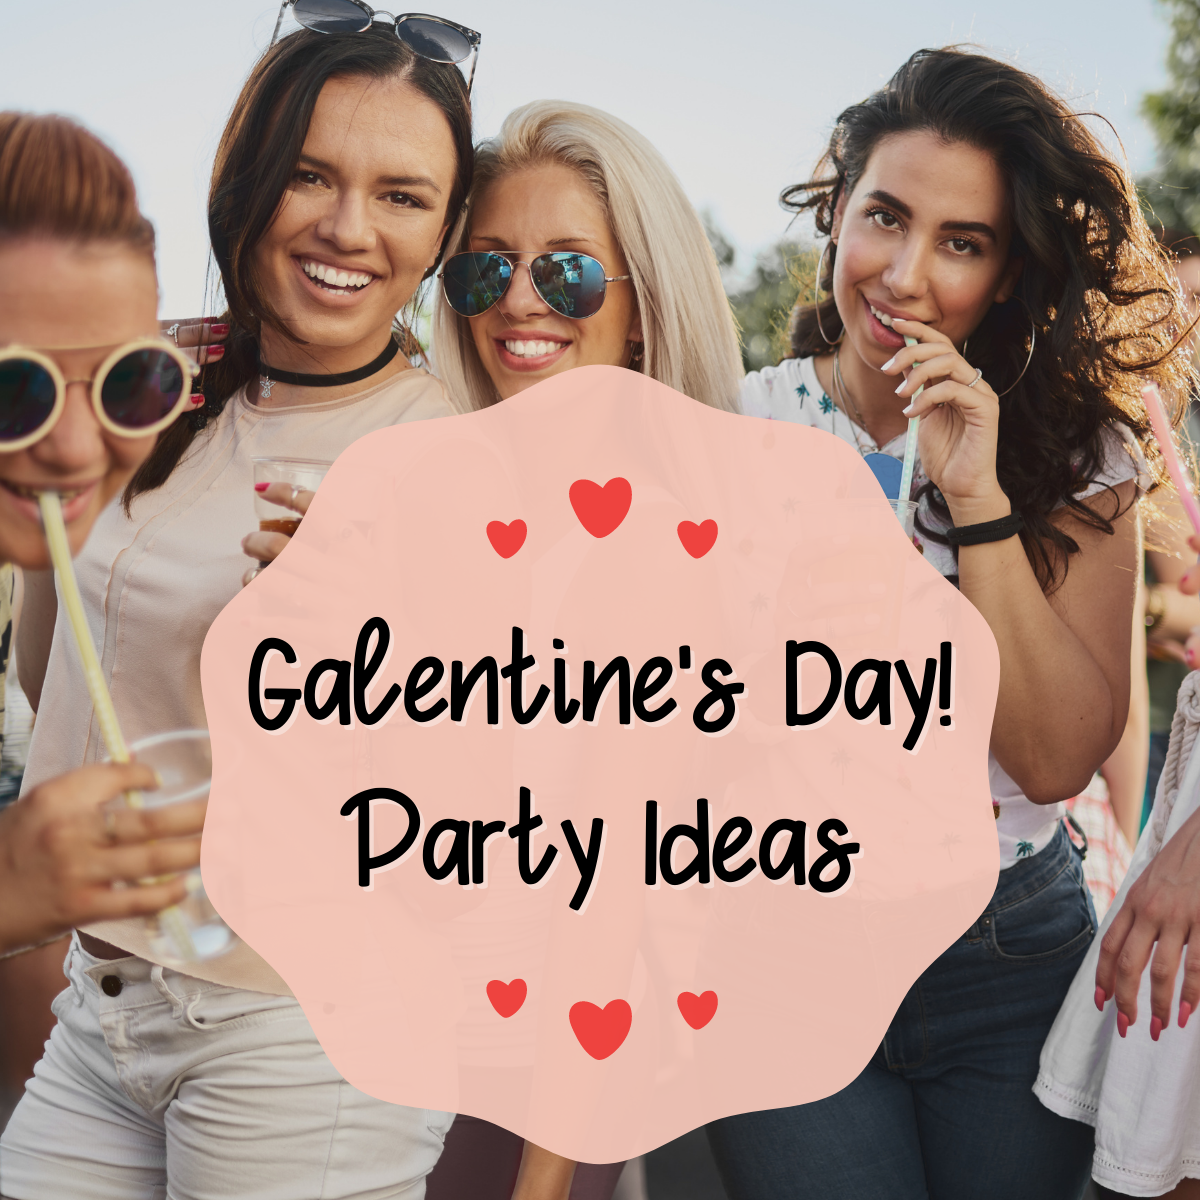 Galentine's Day Party Ideas